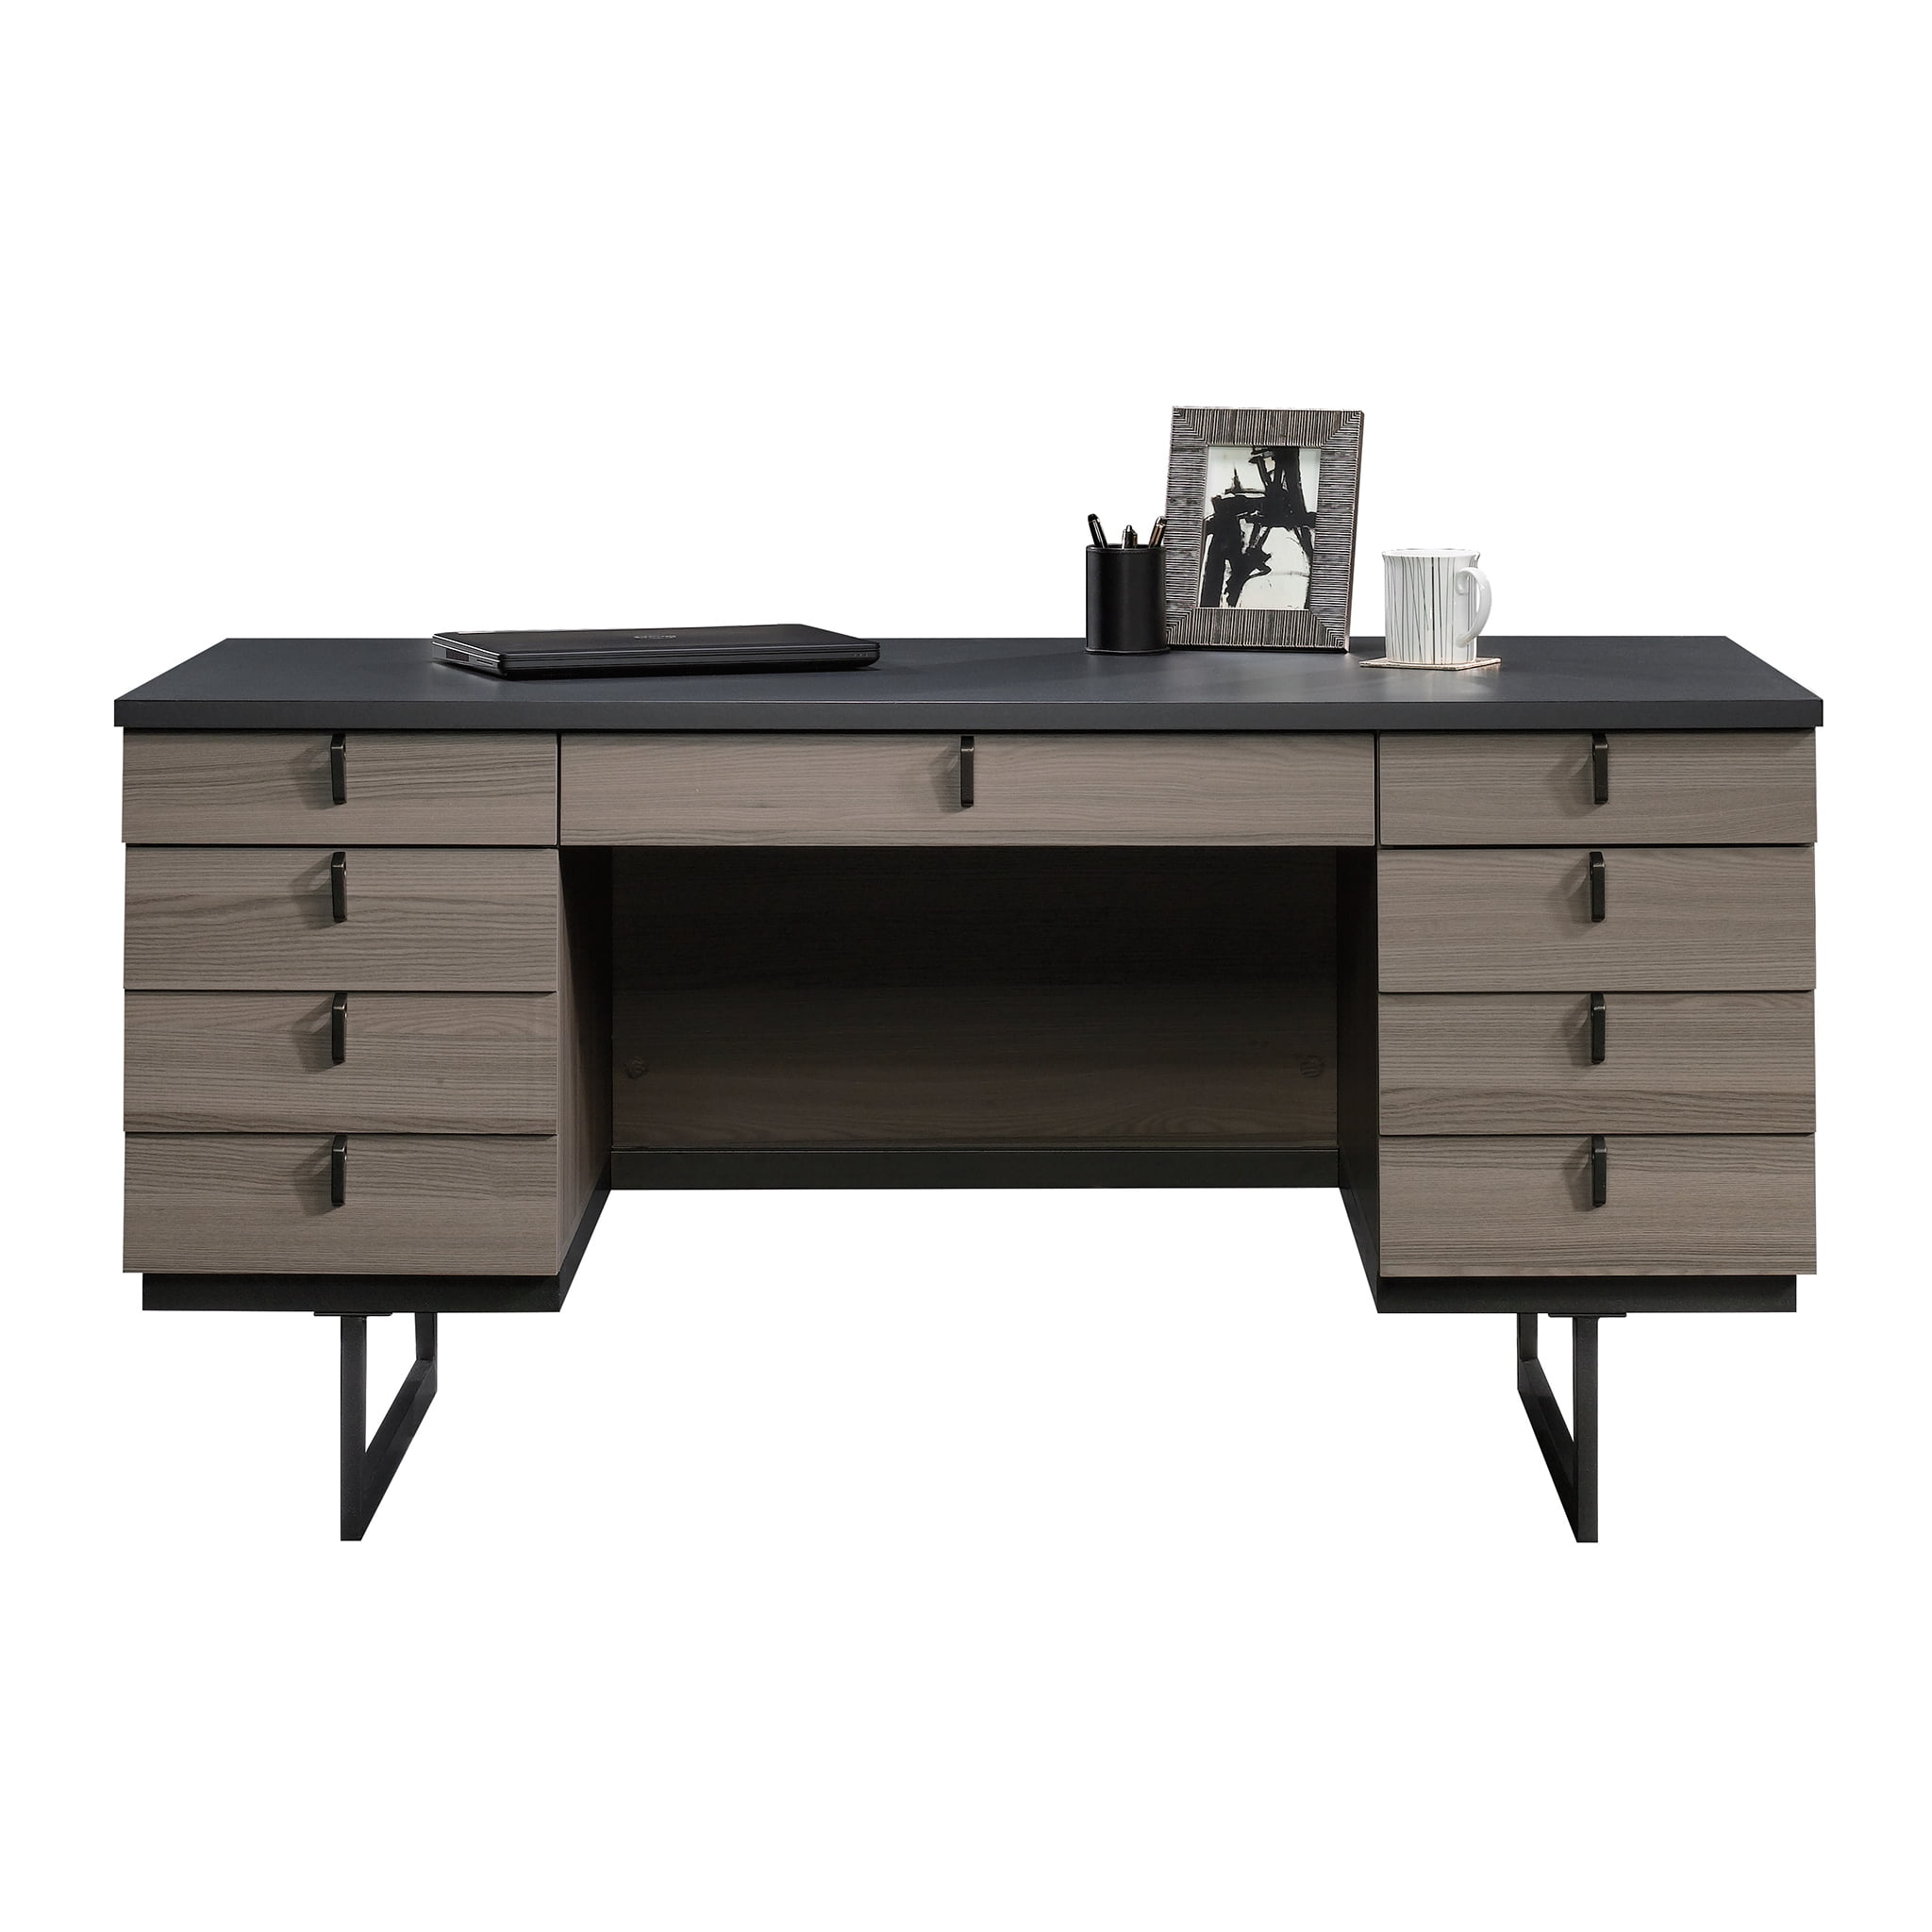 Buy MD Office &Executive Desk in india